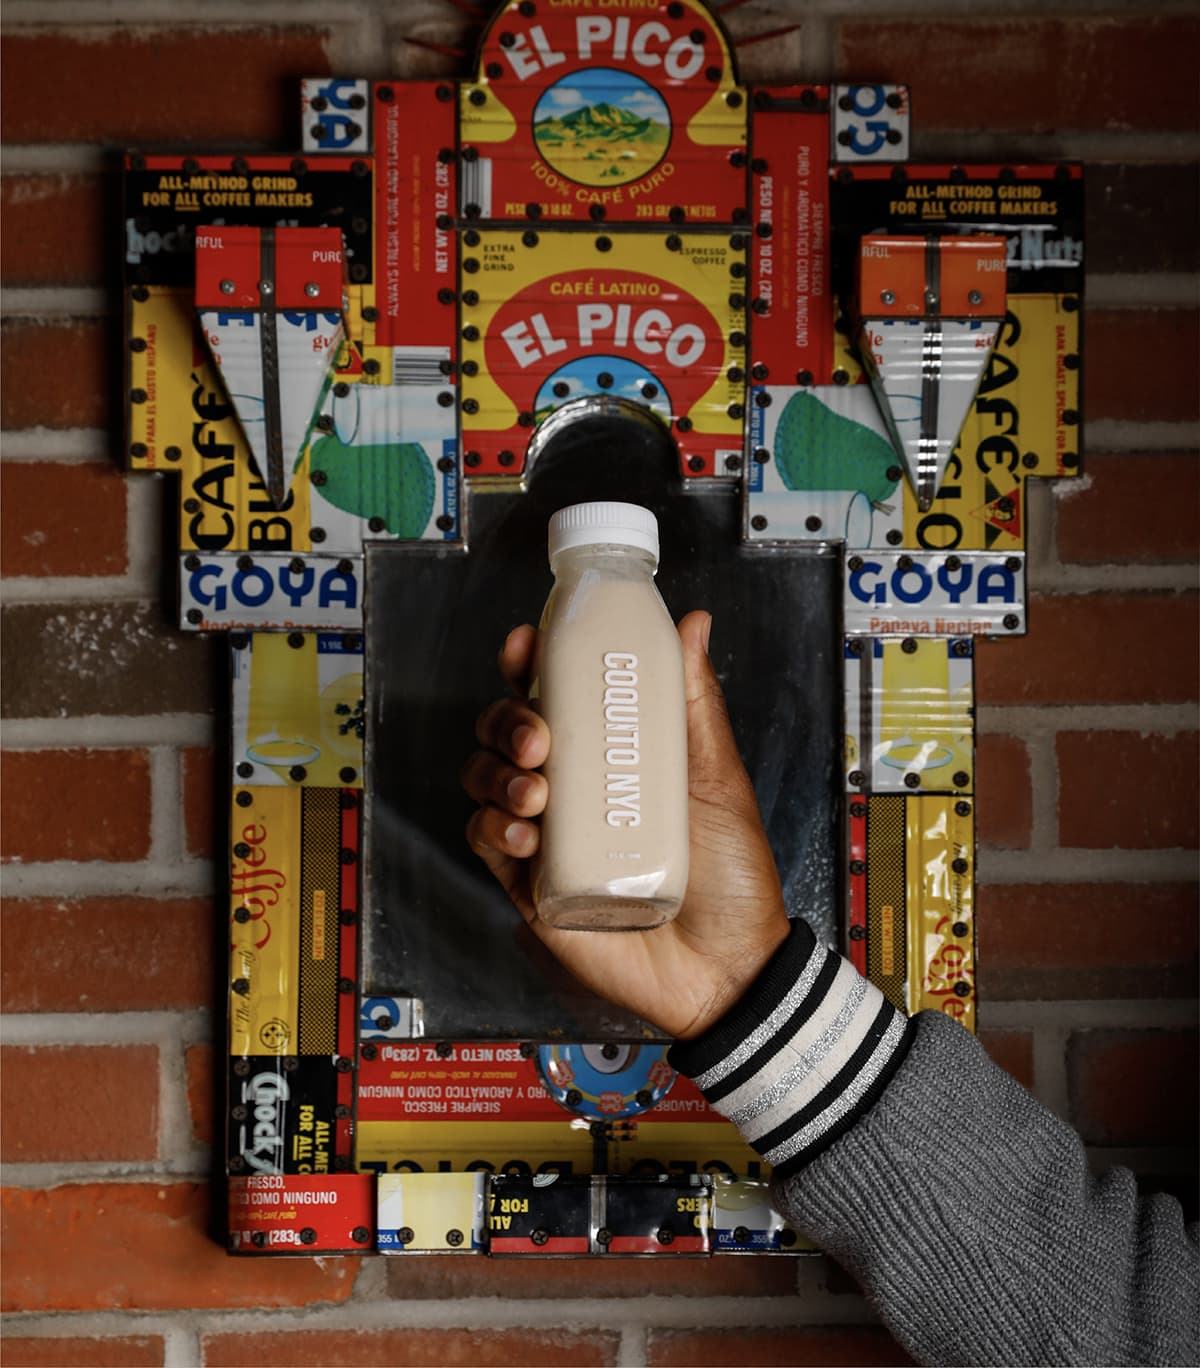 Coquito bottle being held